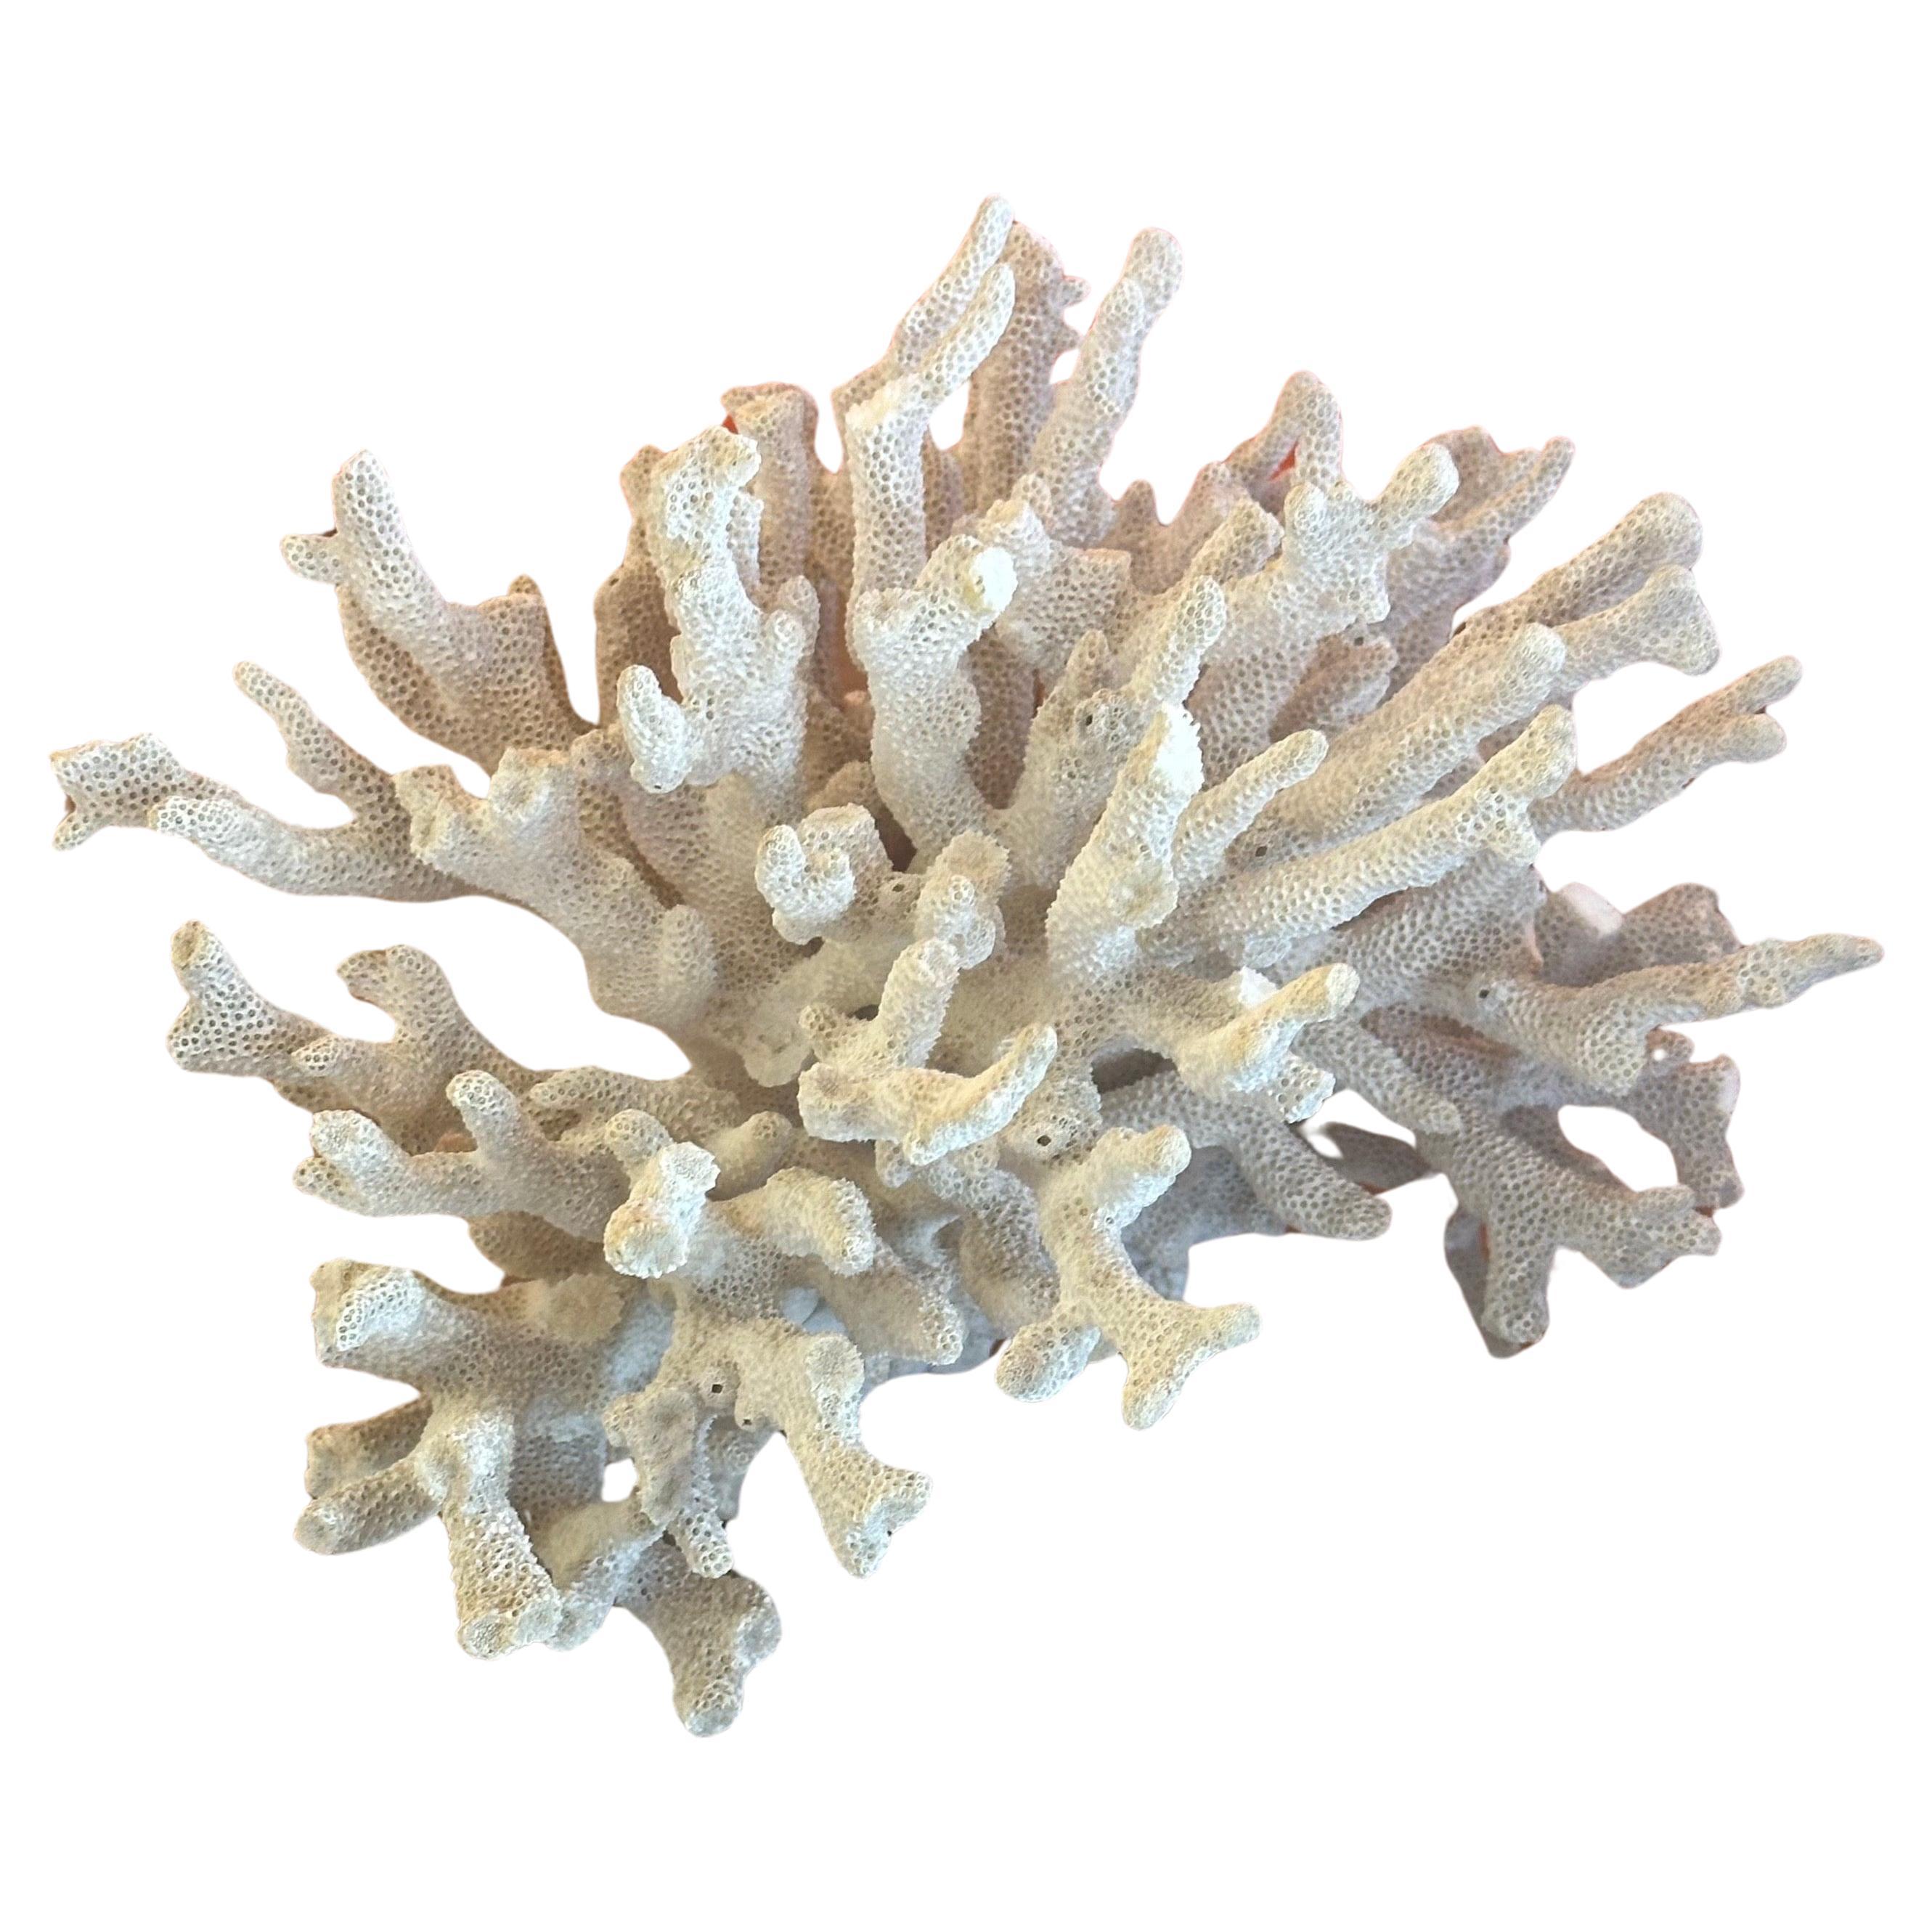 A large natural white sea coral specimen, circa 1970s. The piece is in great condition and measures 9.5